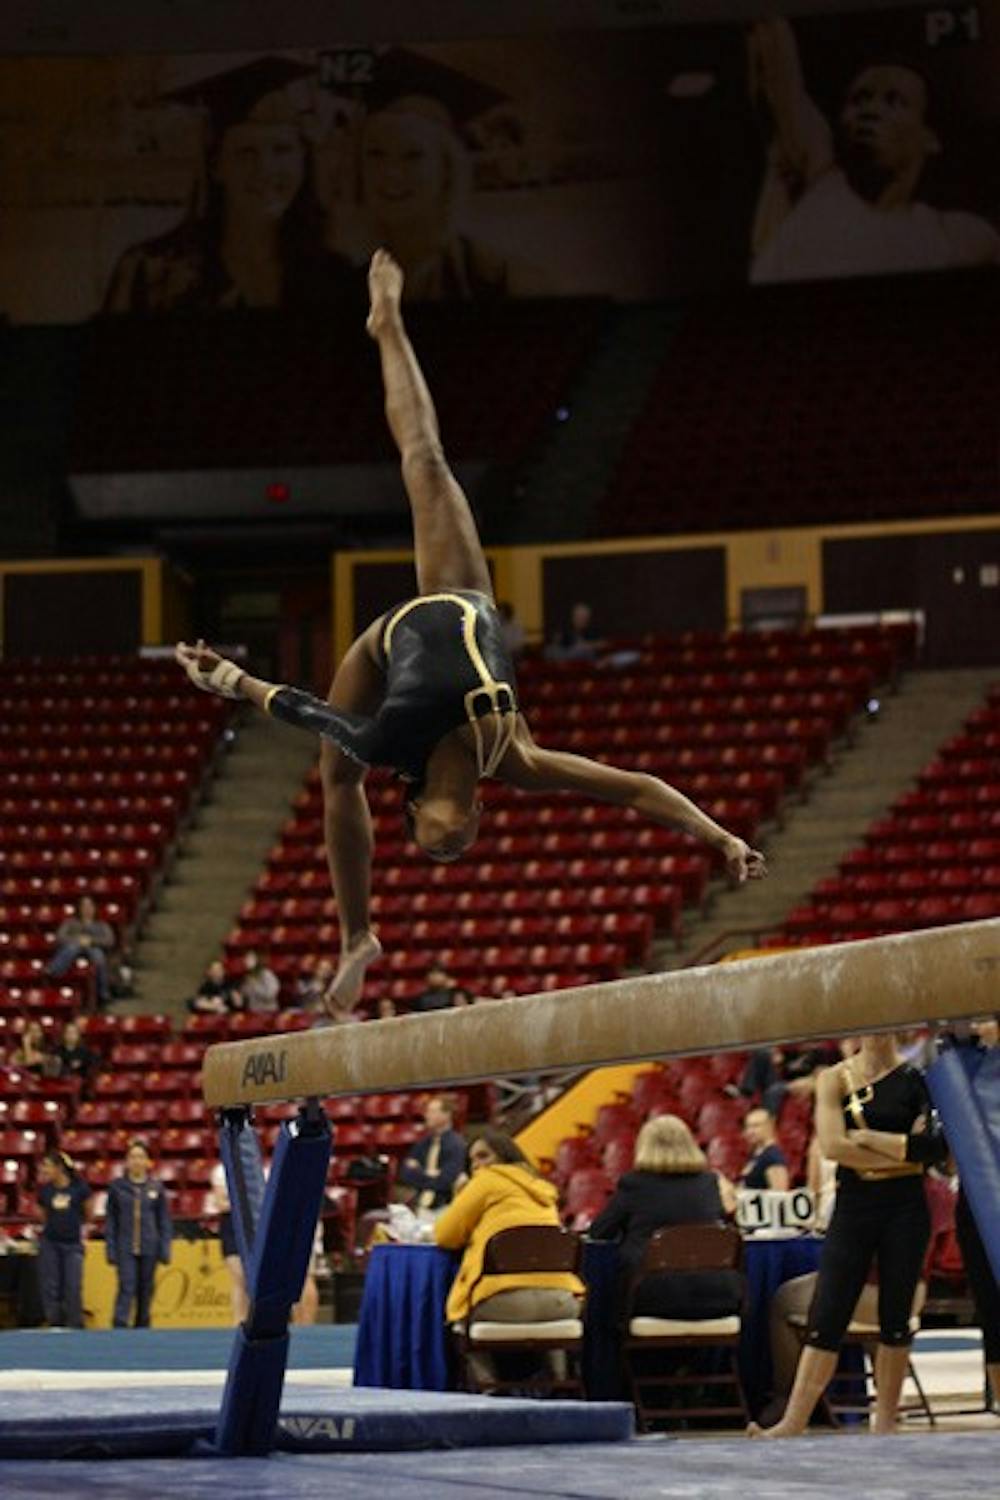 Solid victory: ASU sophomore Nickie Johnson flips on the beam during the Sun Devils’ victory over Cal on Friday night. ASU had strong performances across the board, including on beam, where they had trouble earlier in the season. (Photo by Rosie Gochnour)